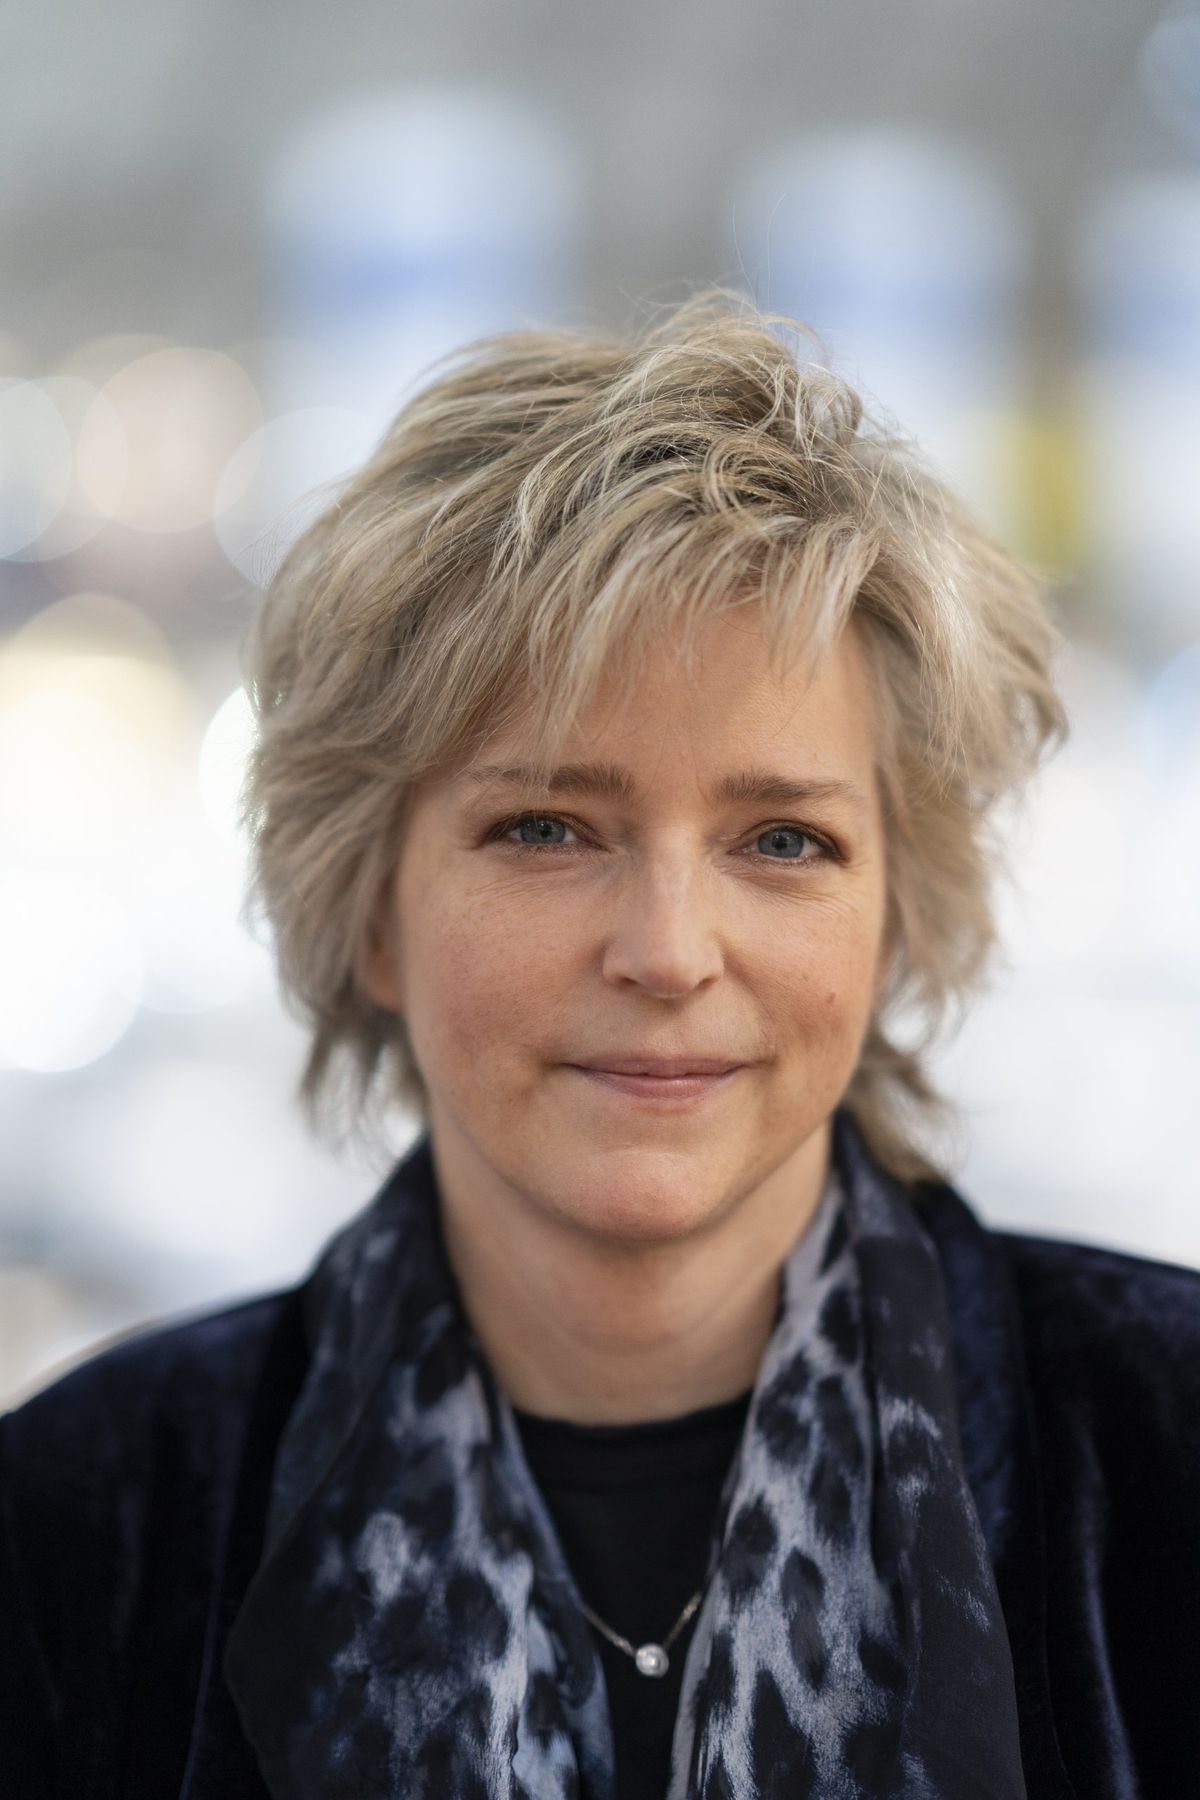 Karin Slaughter reveals the secrets behind her books and writing